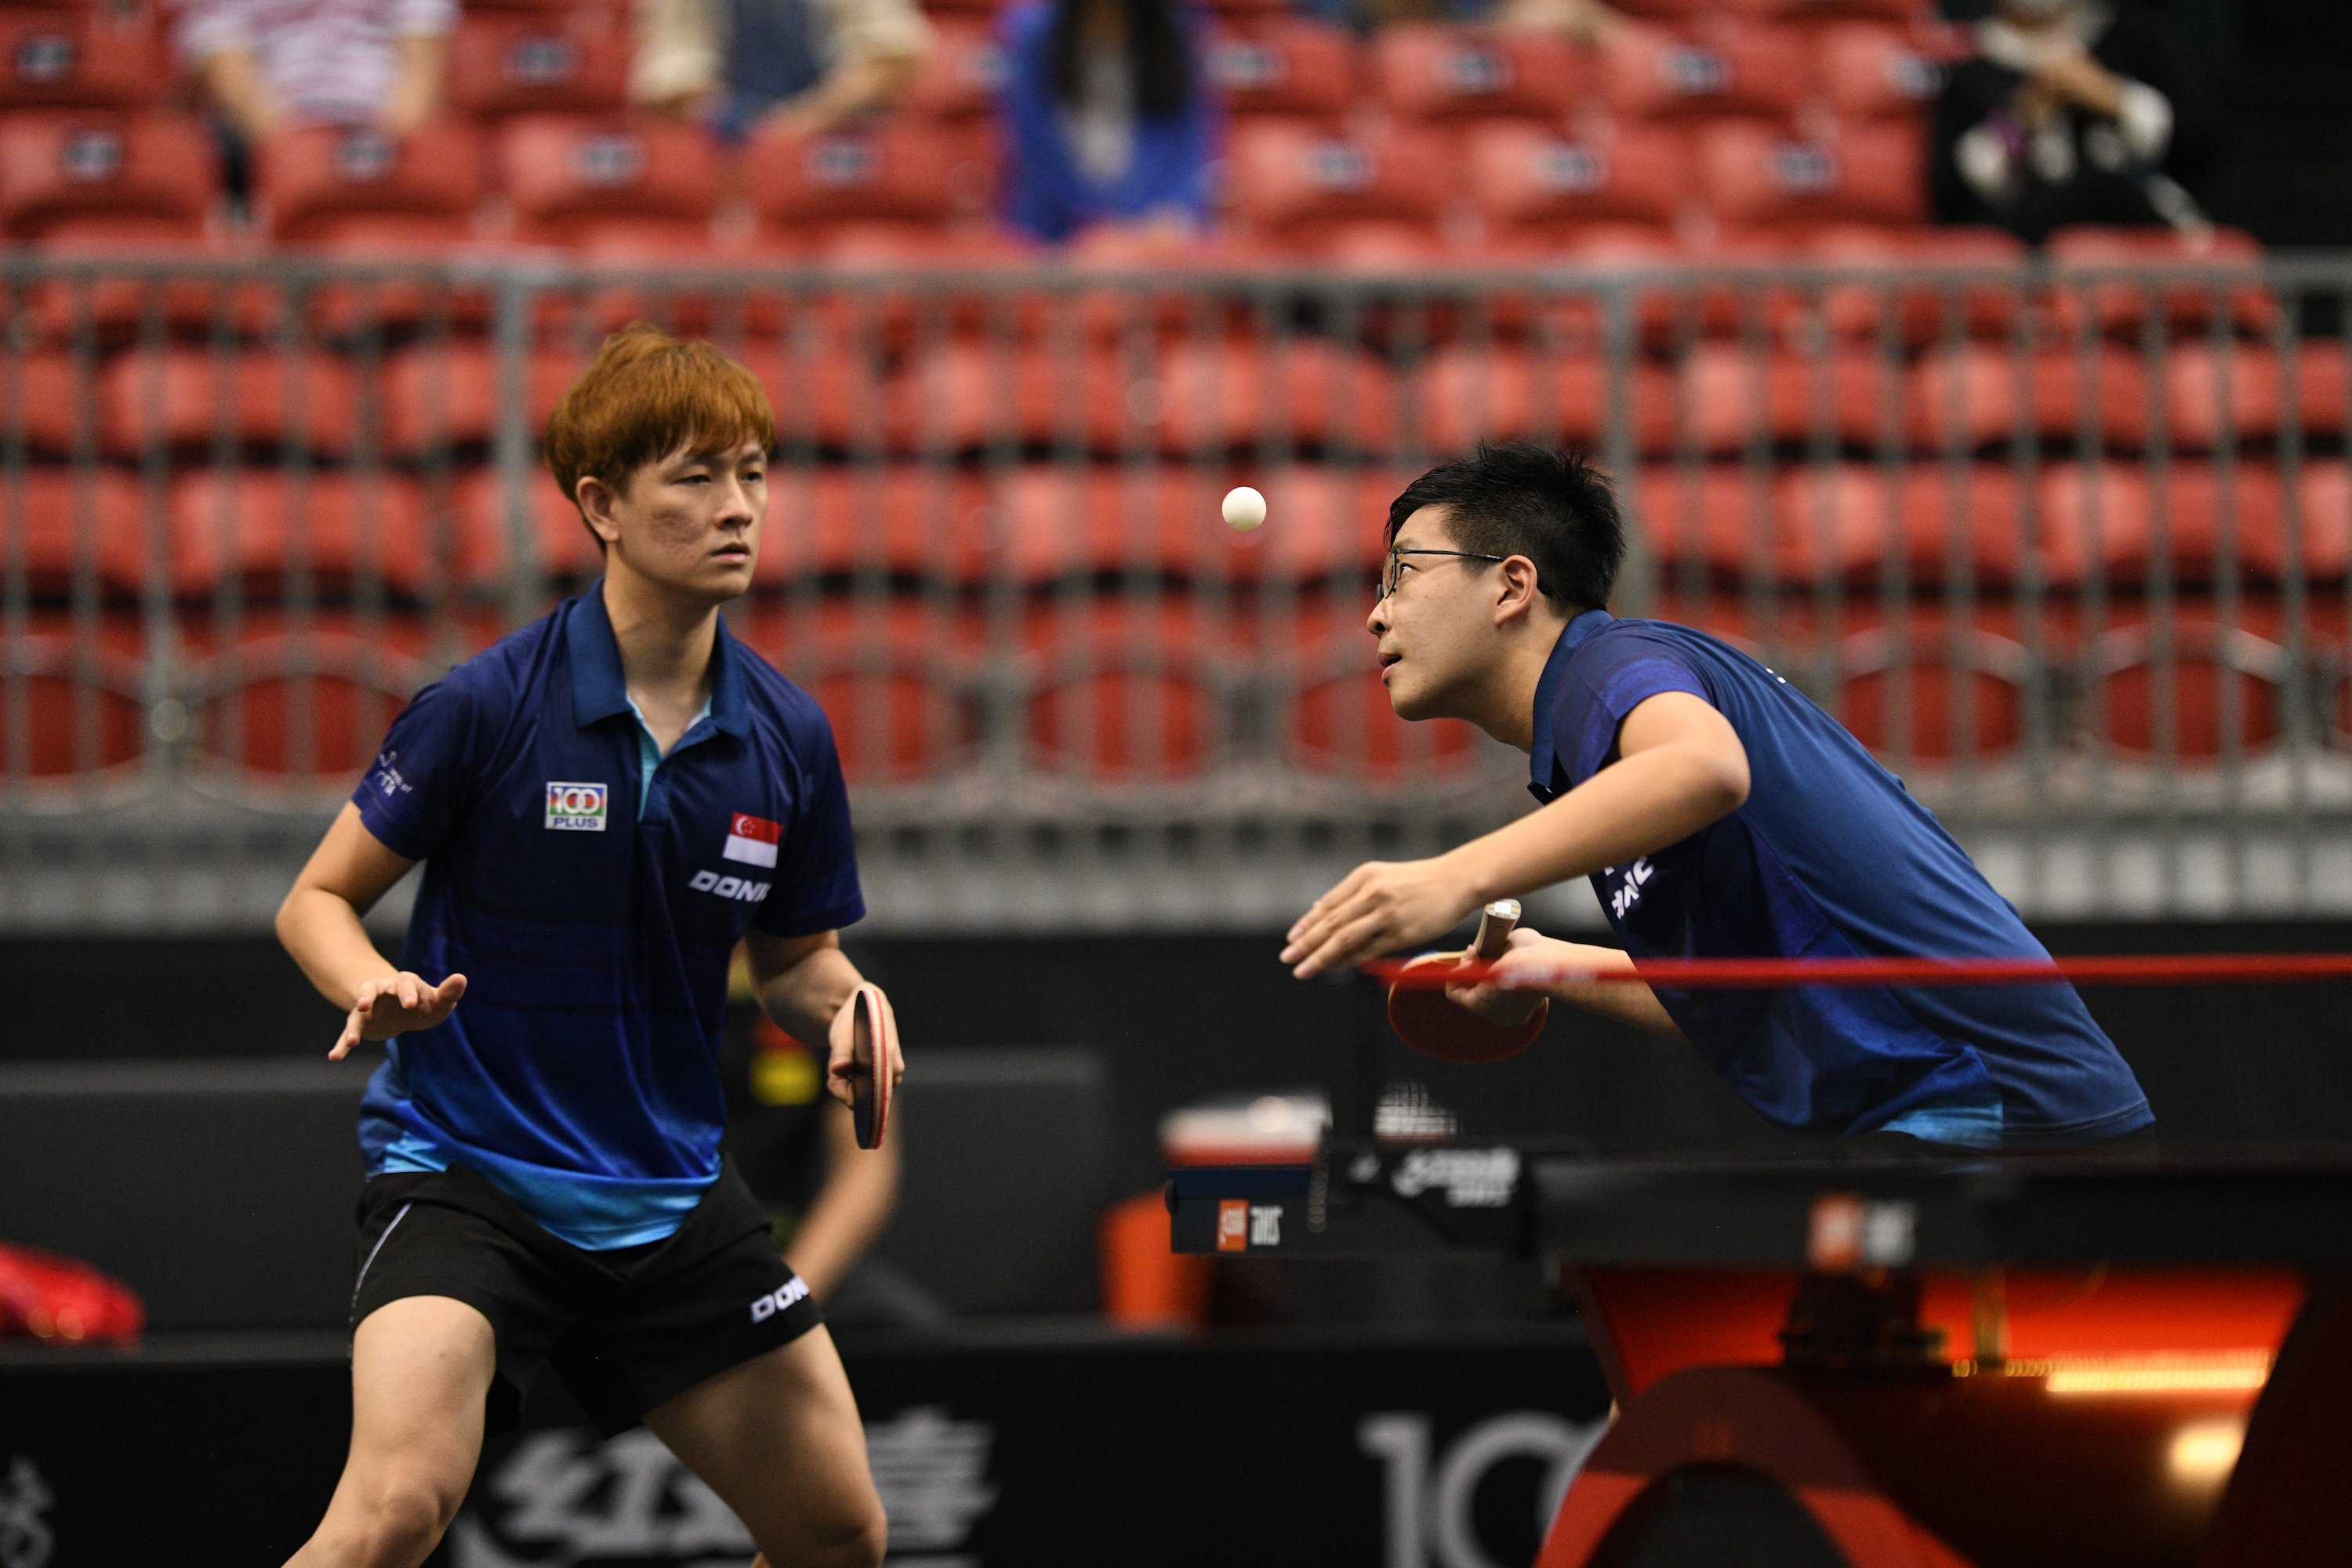 Clarence Chew (left) and Ethan Poh (right)_Singapore Smash 2022_Photo credit to World Table Tennis